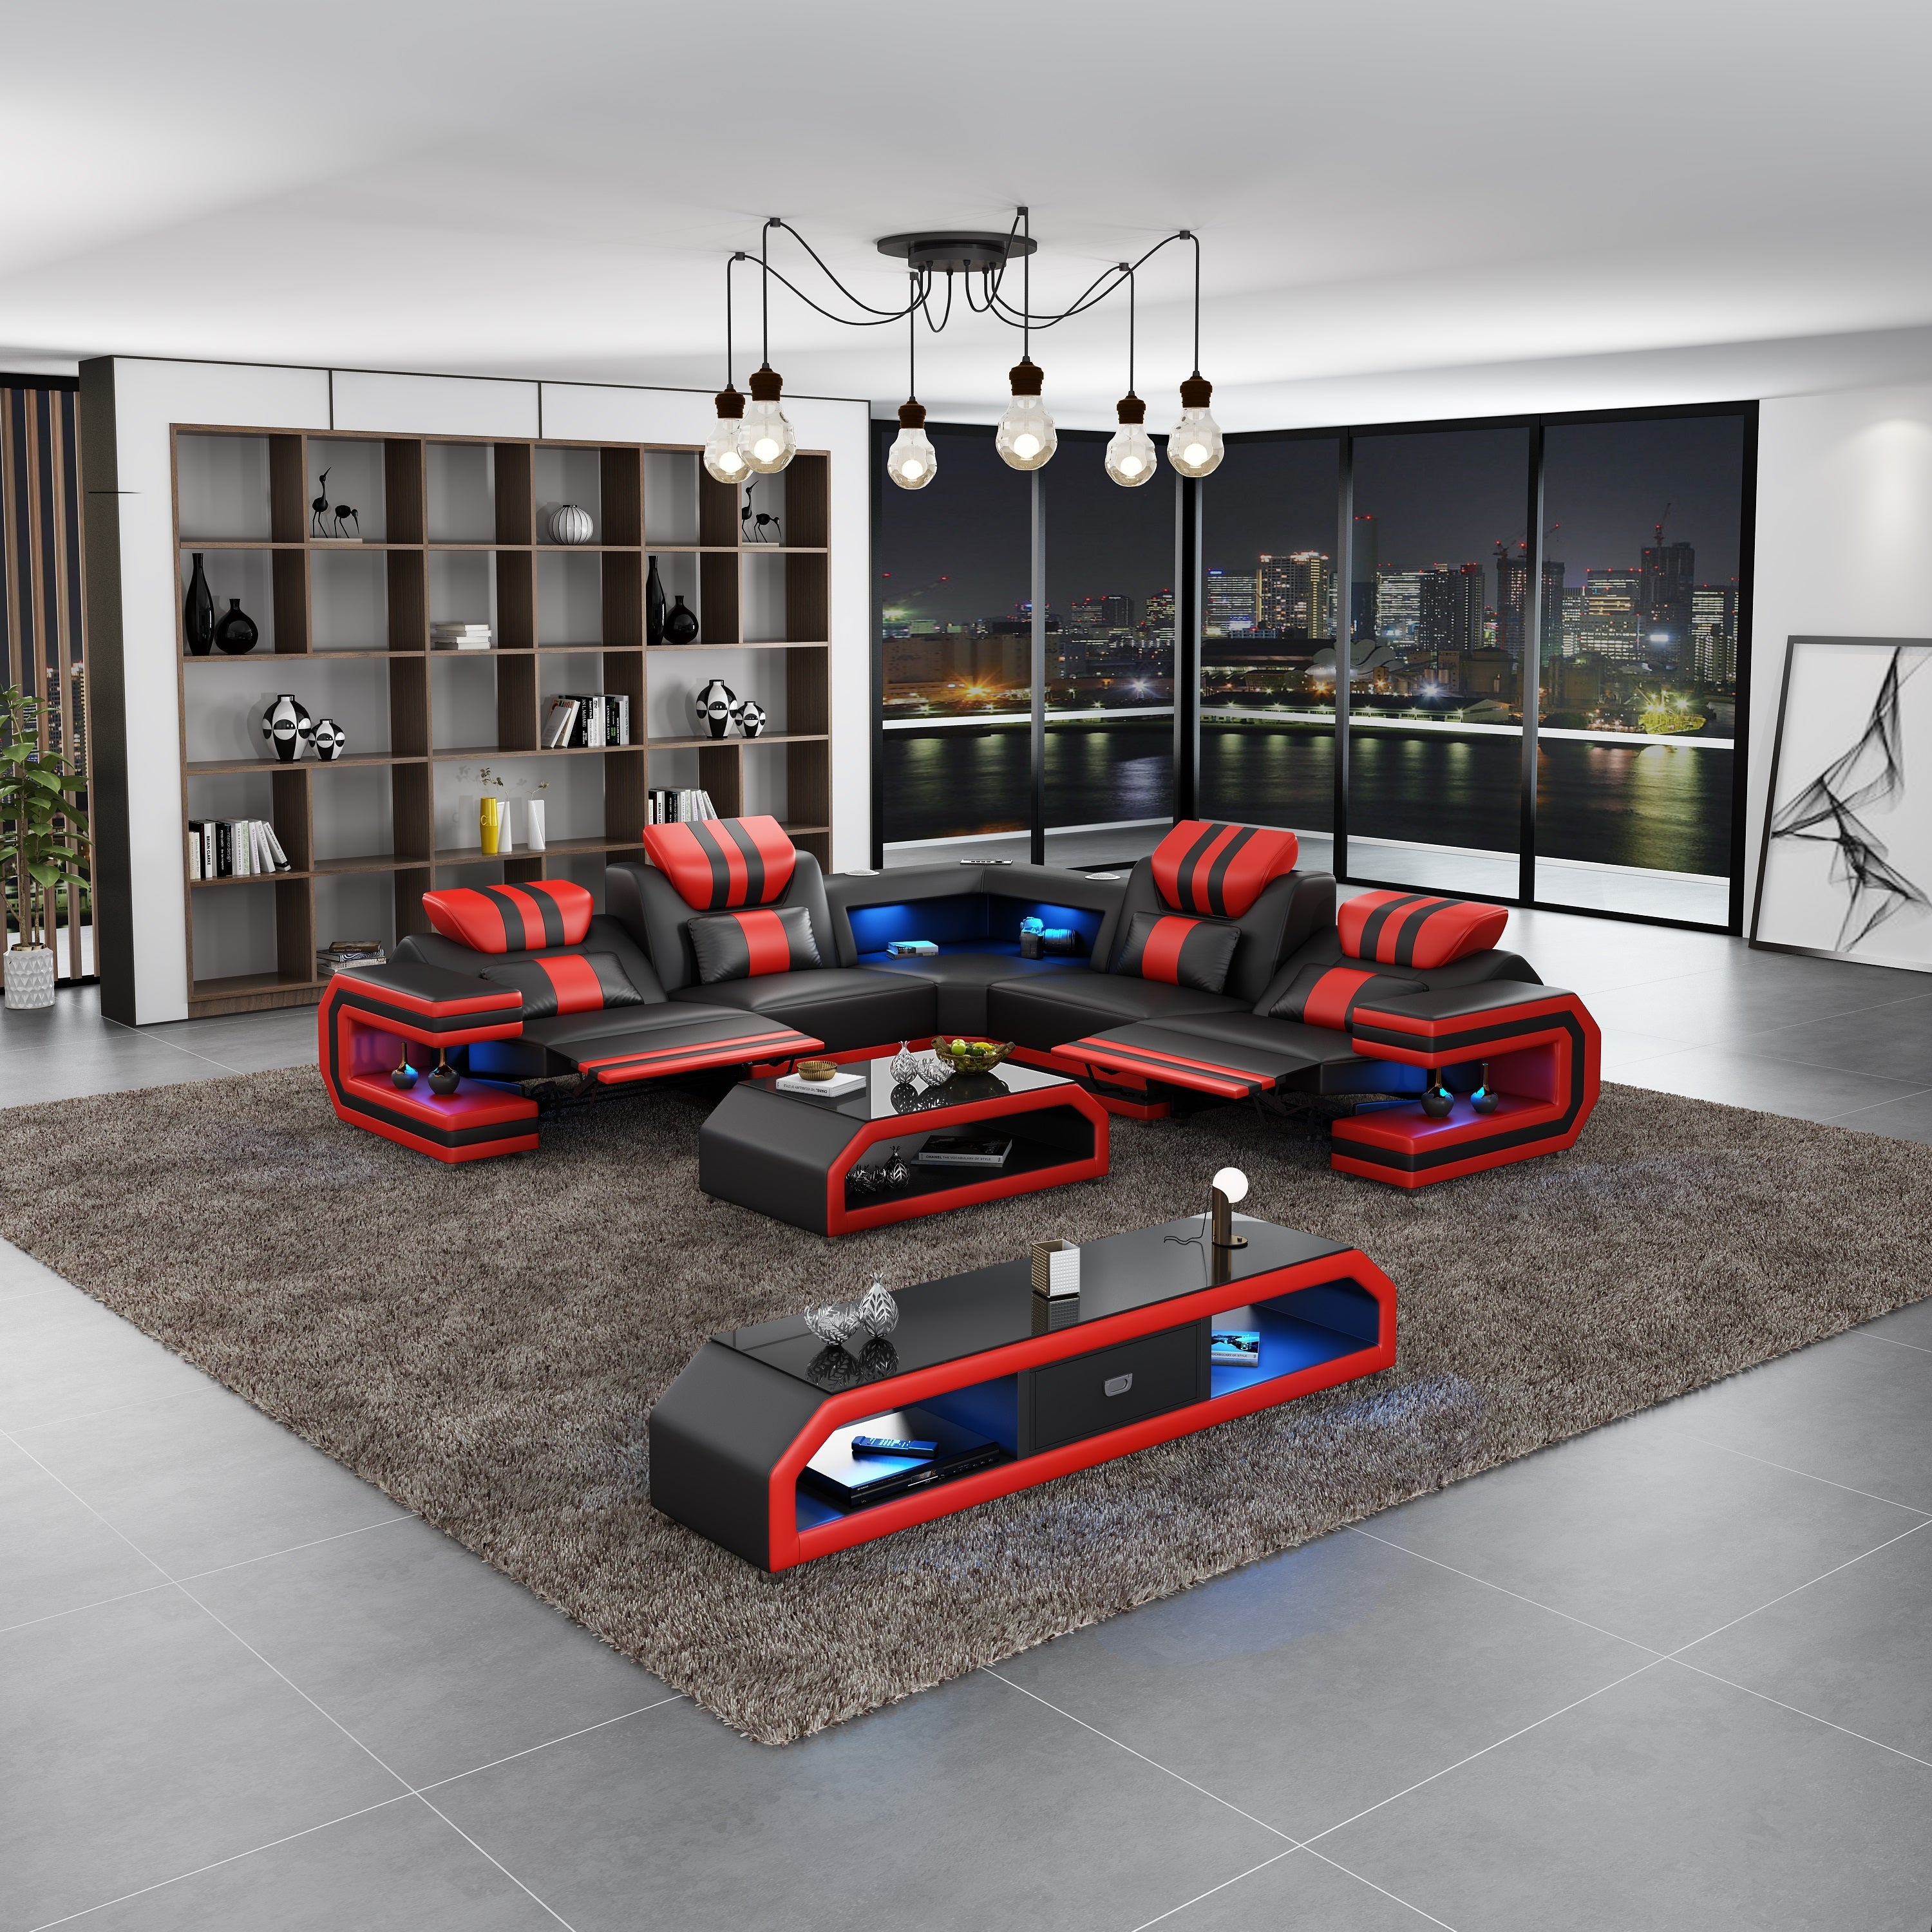 European Furniture - Lightsaber LED Sectional Dual Recliners Black Red Italian Leather - LED-87771-BR-DRR - New Star Living